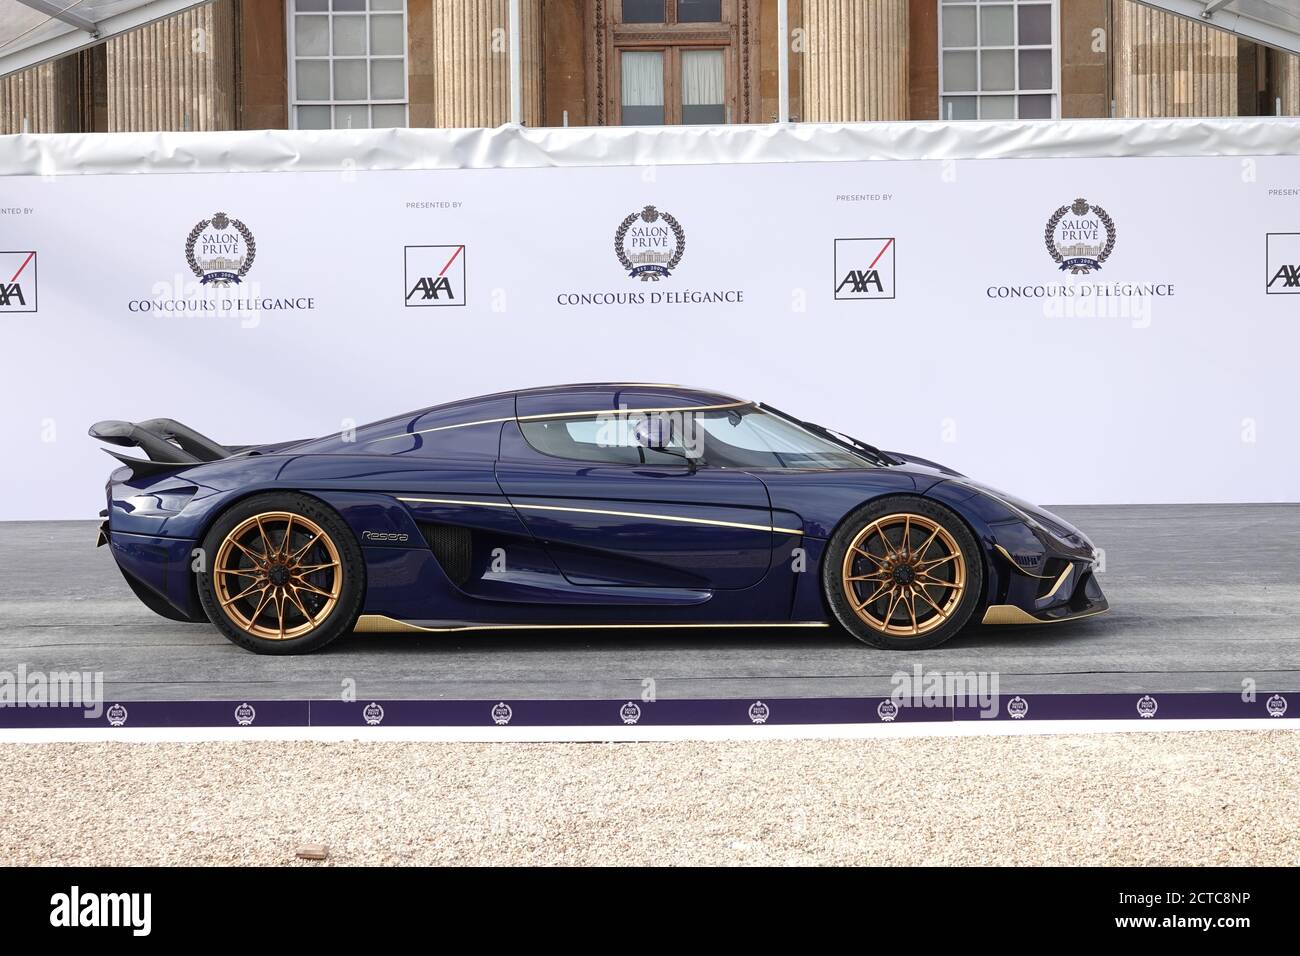 Blenheim Palace, Oxford, UK. 22nd Sep, 2020. A beautiful example of a KOENIGSEGG hypercard poses for the cameras At the famous Salon Prive held at Blenheim Palace Credit: Motofoto/Alamy Live News Stock Photo